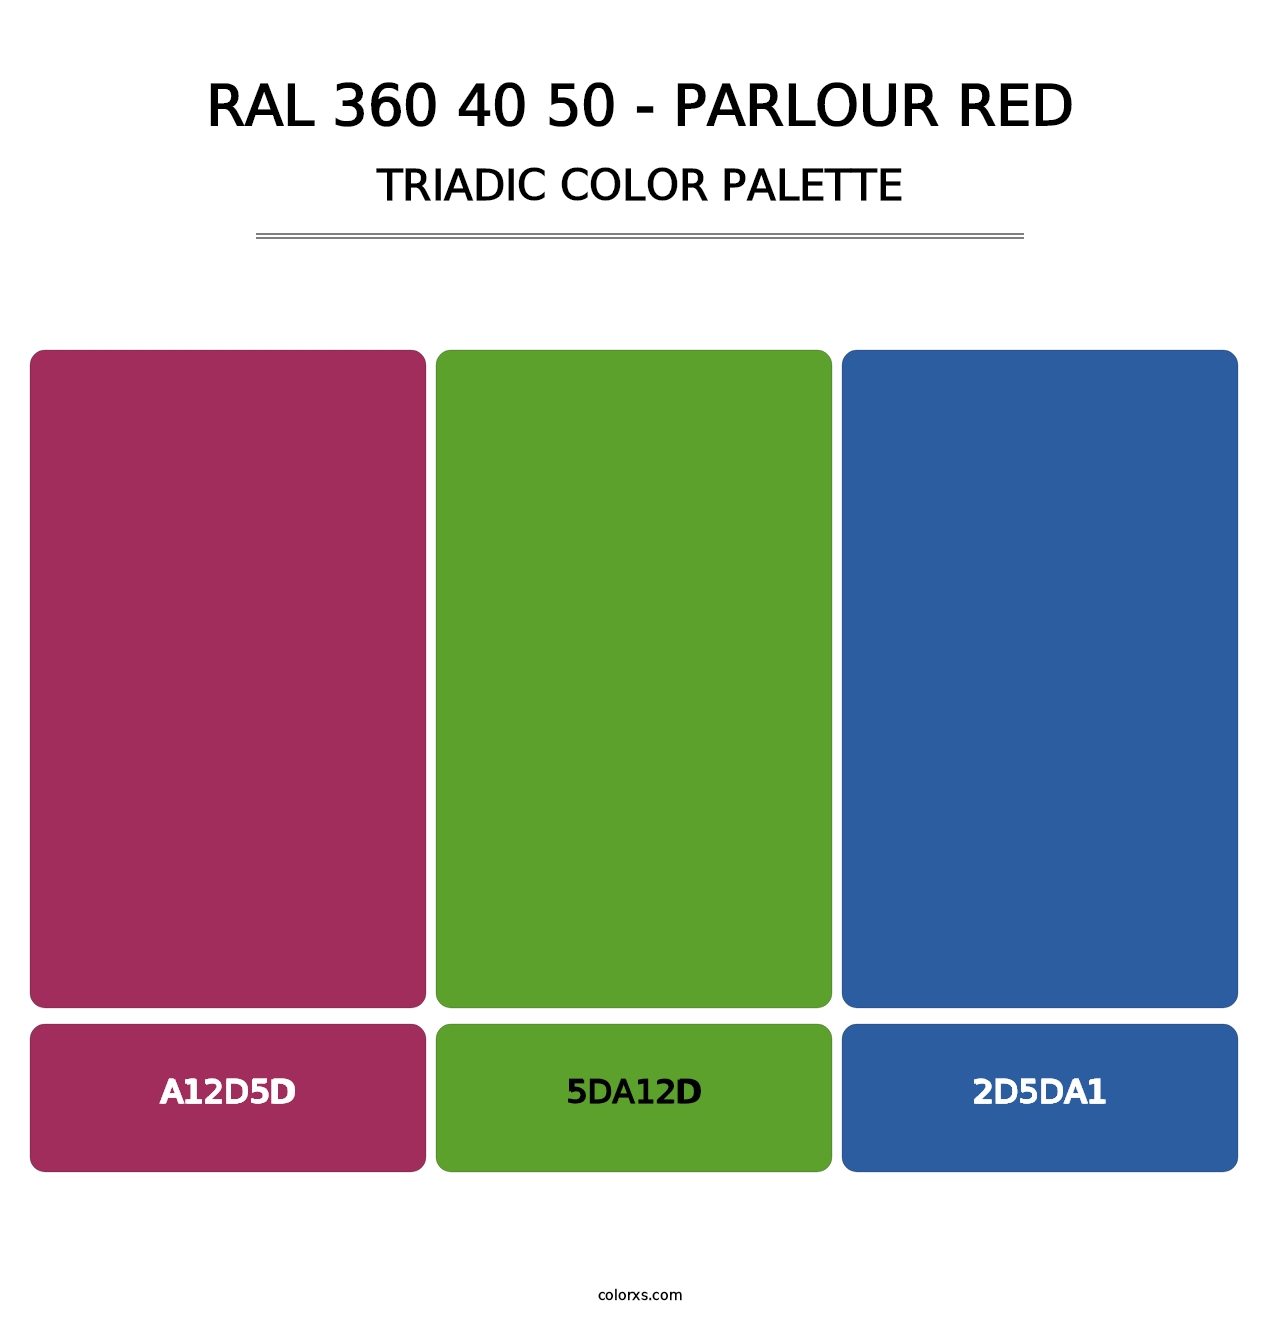 RAL 360 40 50 - Parlour Red - Triadic Color Palette